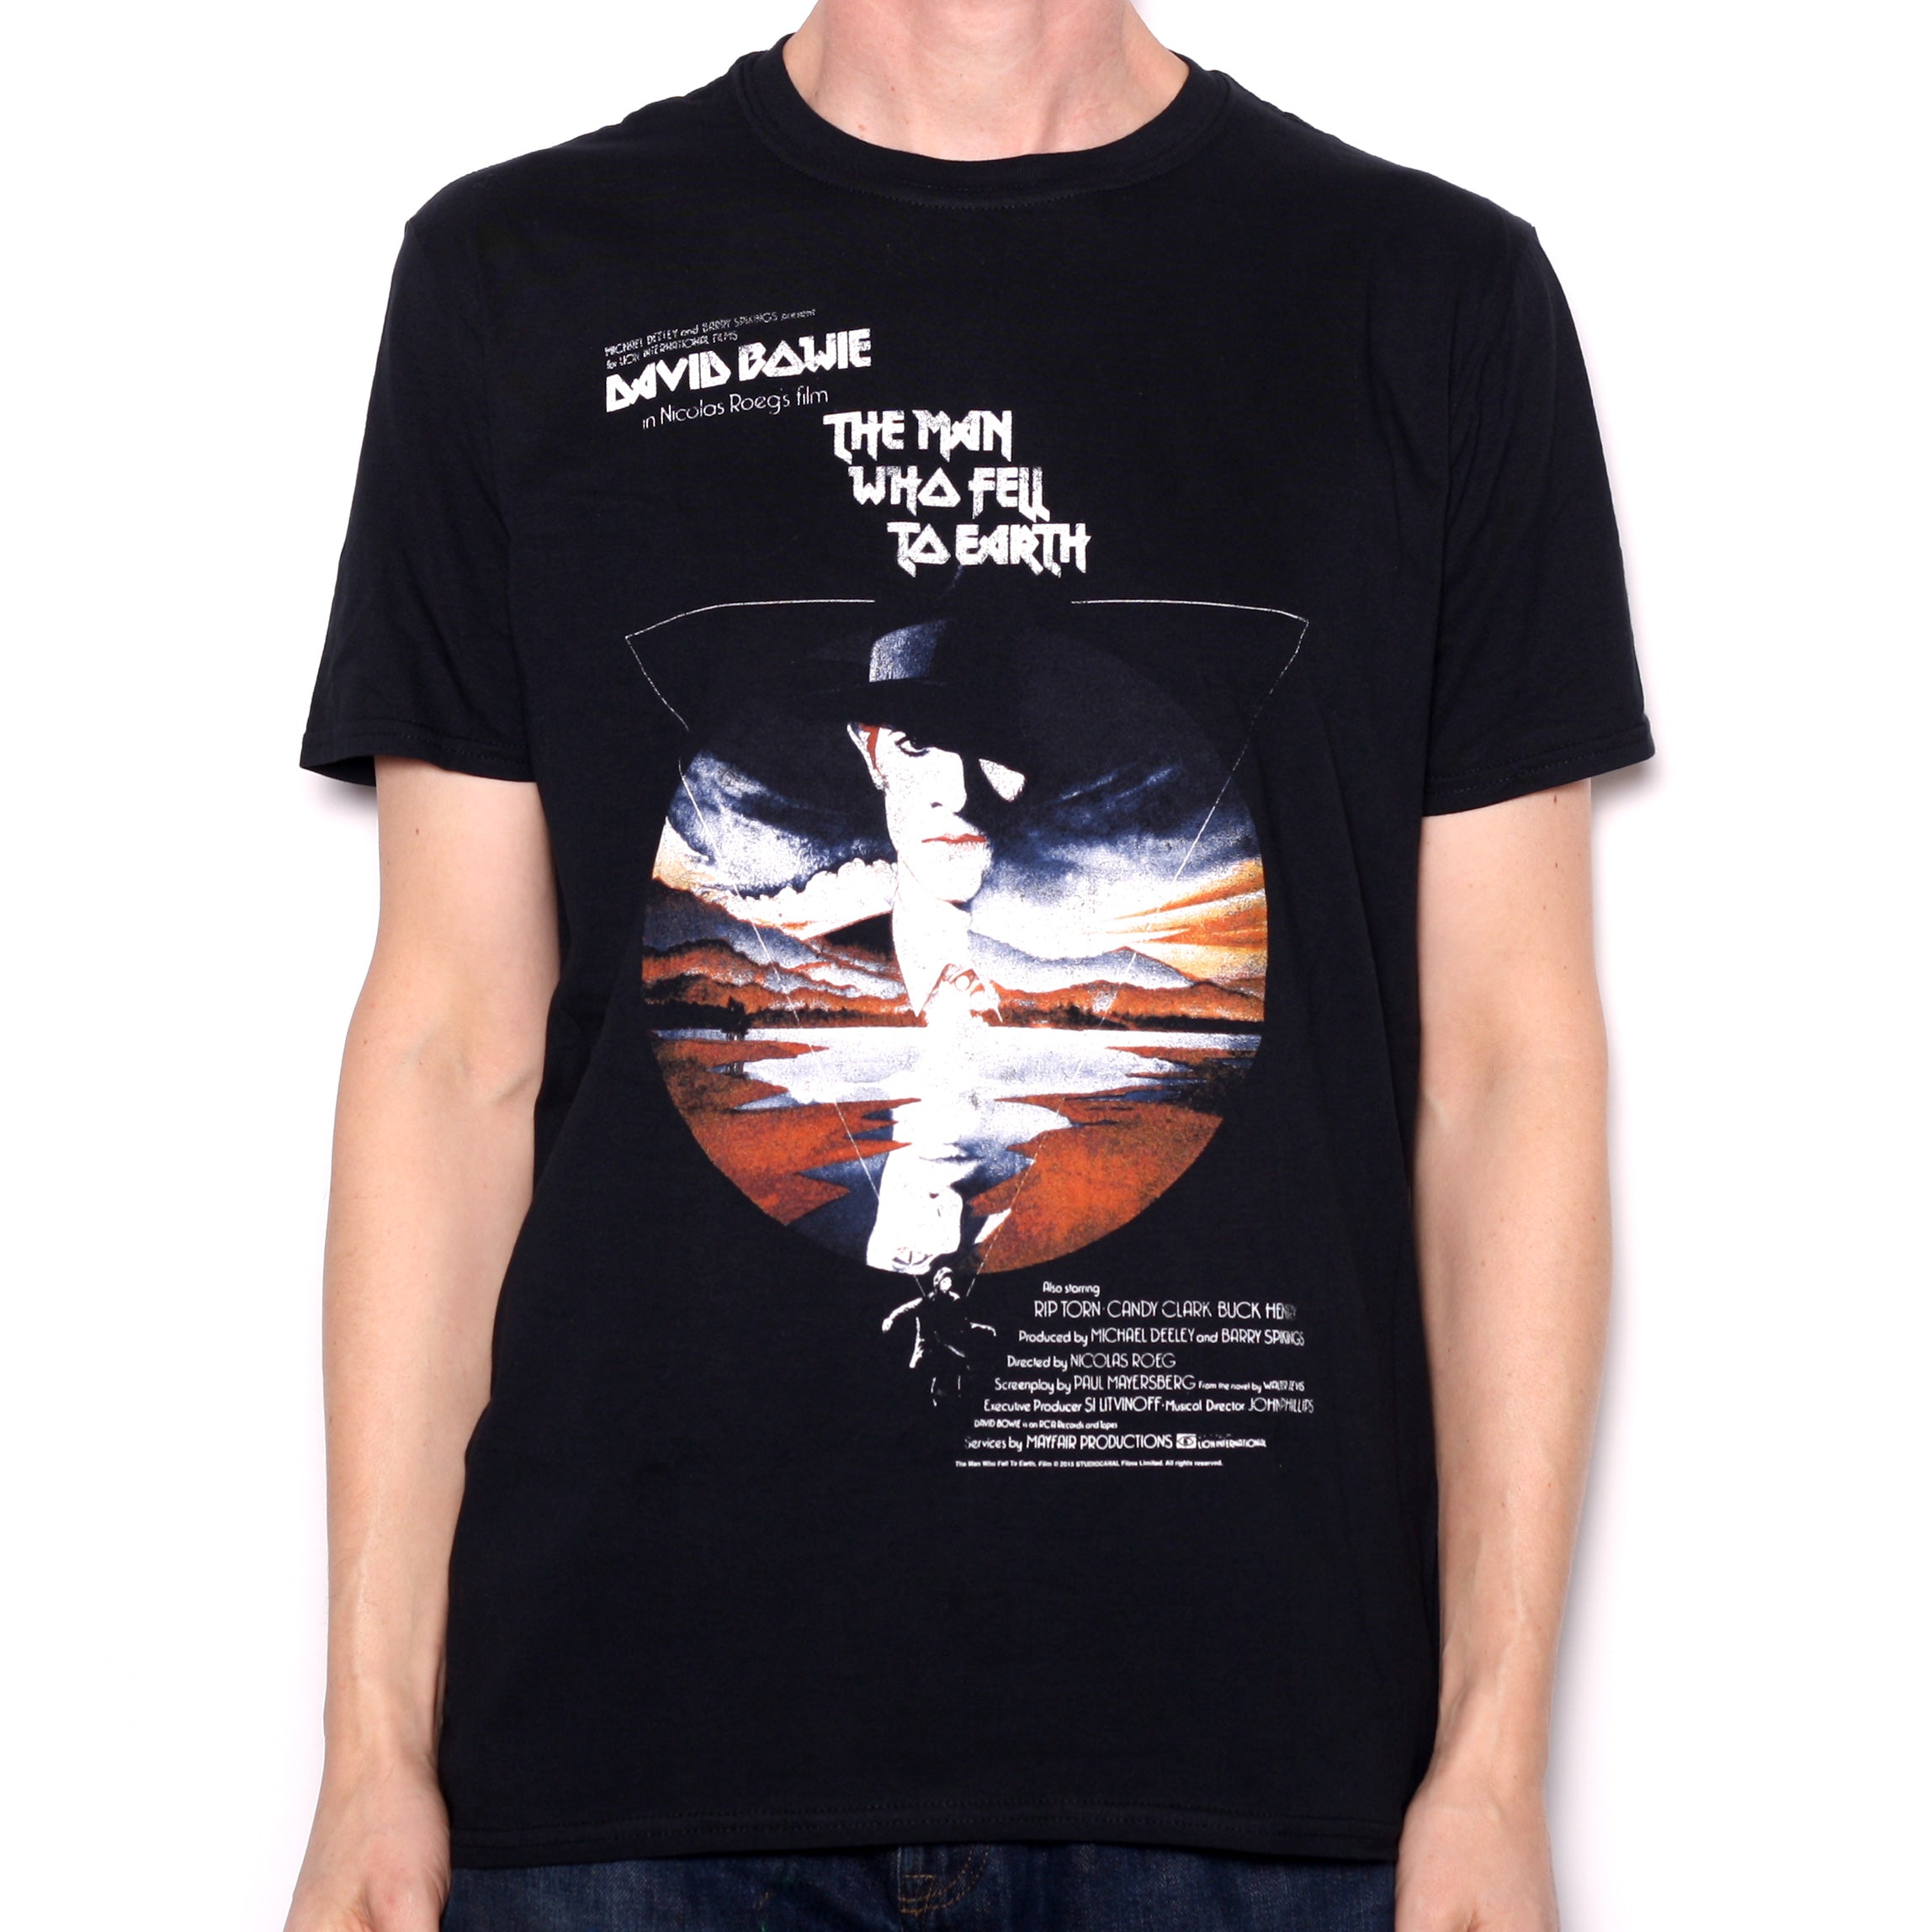 David Bowie T Shirt - The Man Who Fell To Earth